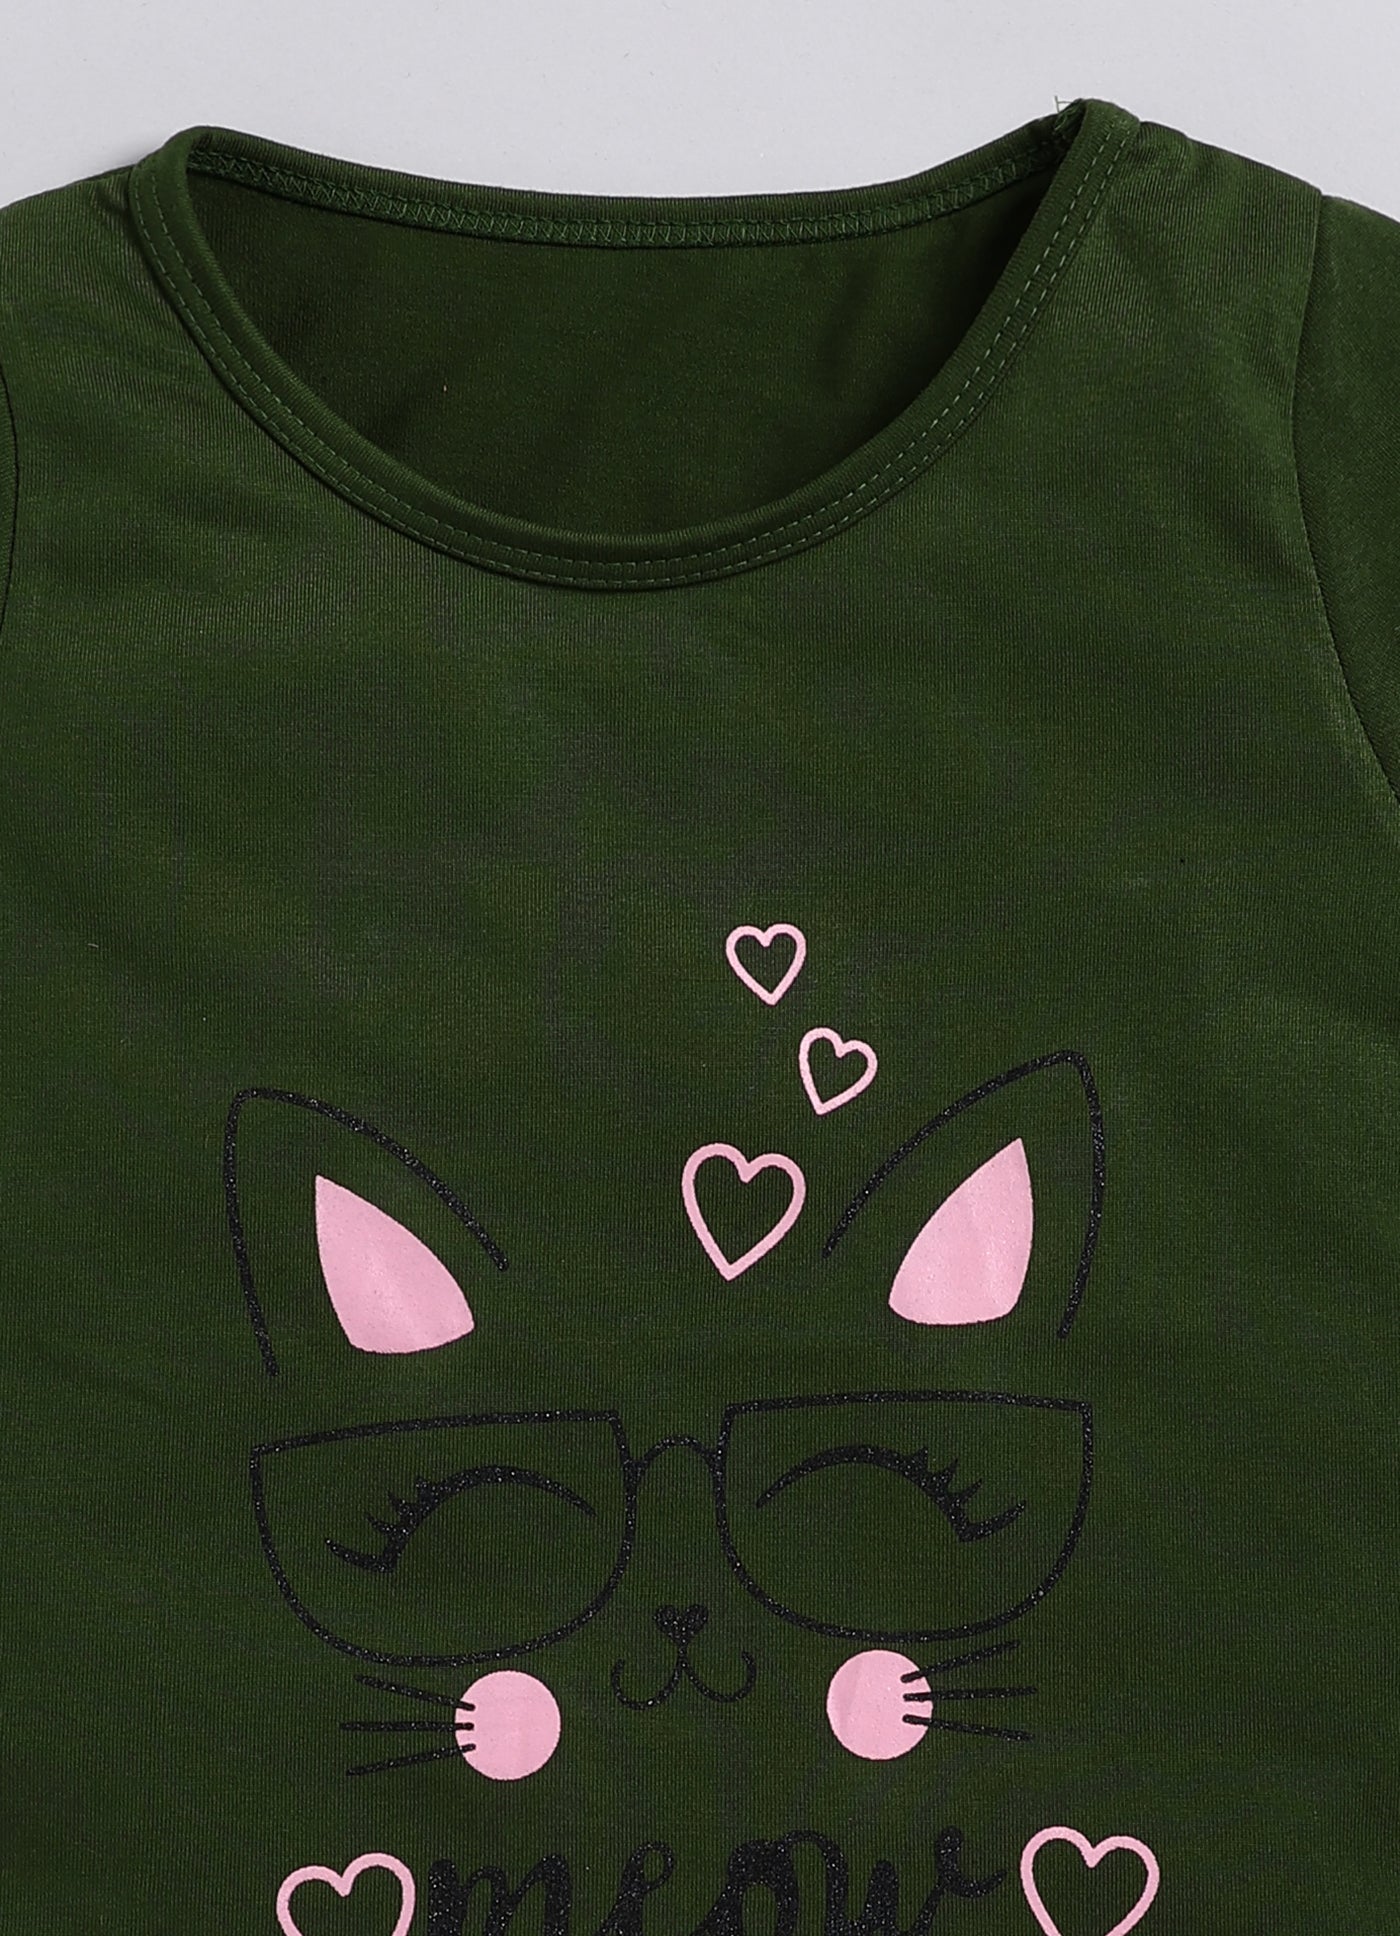 "Mommy Club Playful Cat-Themed Kids' Tee, Sizes 2-6 Years"